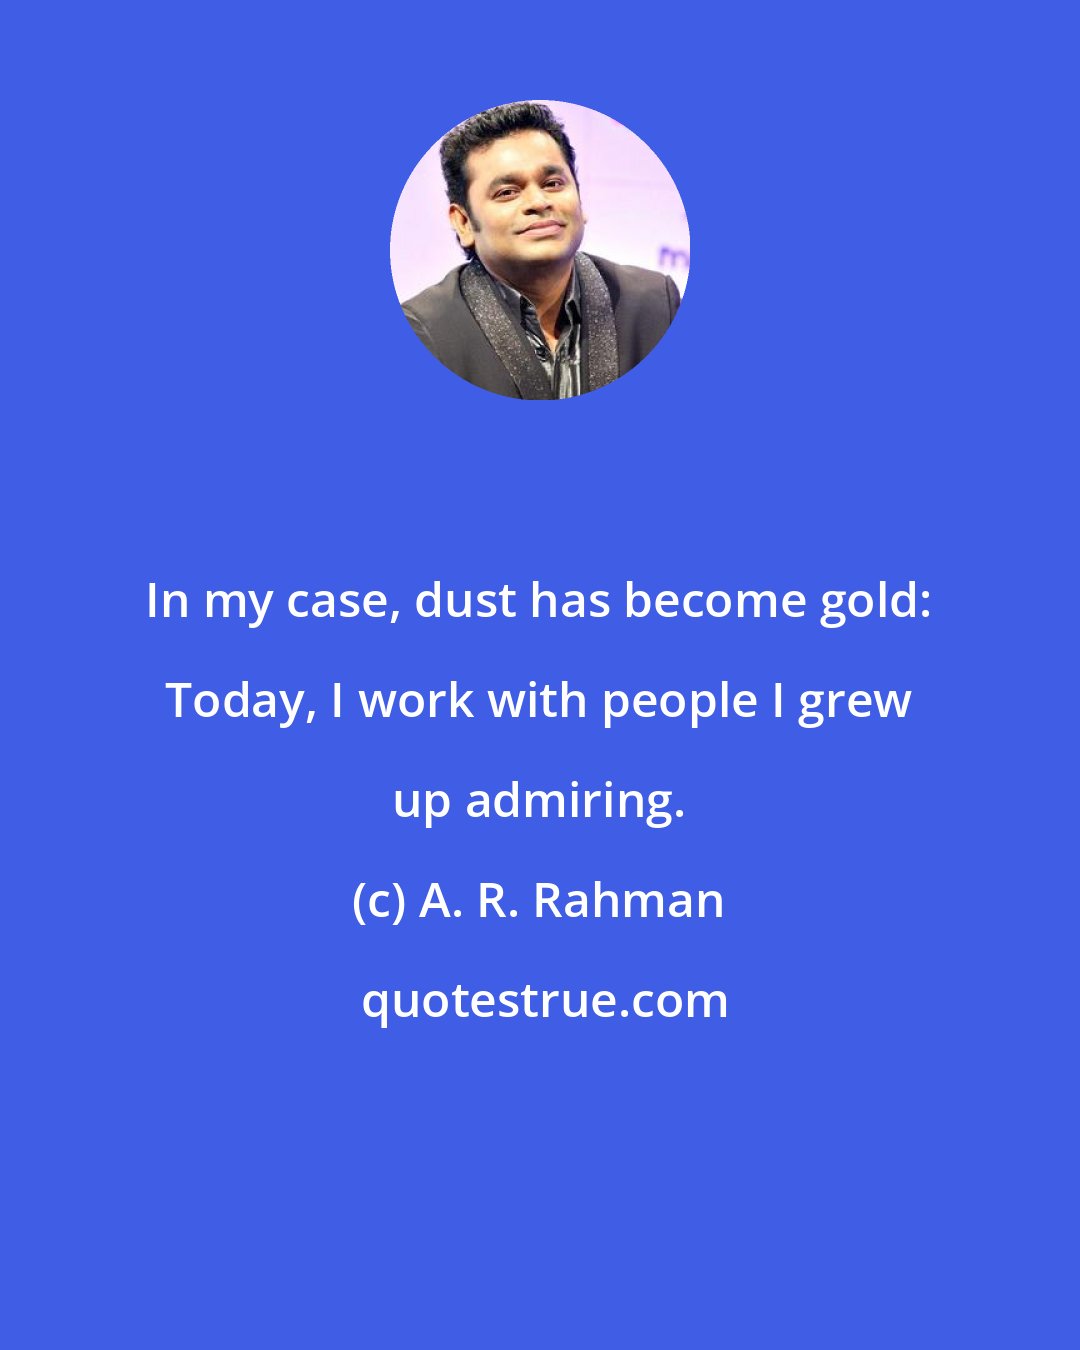 A. R. Rahman: In my case, dust has become gold: Today, I work with people I grew up admiring.